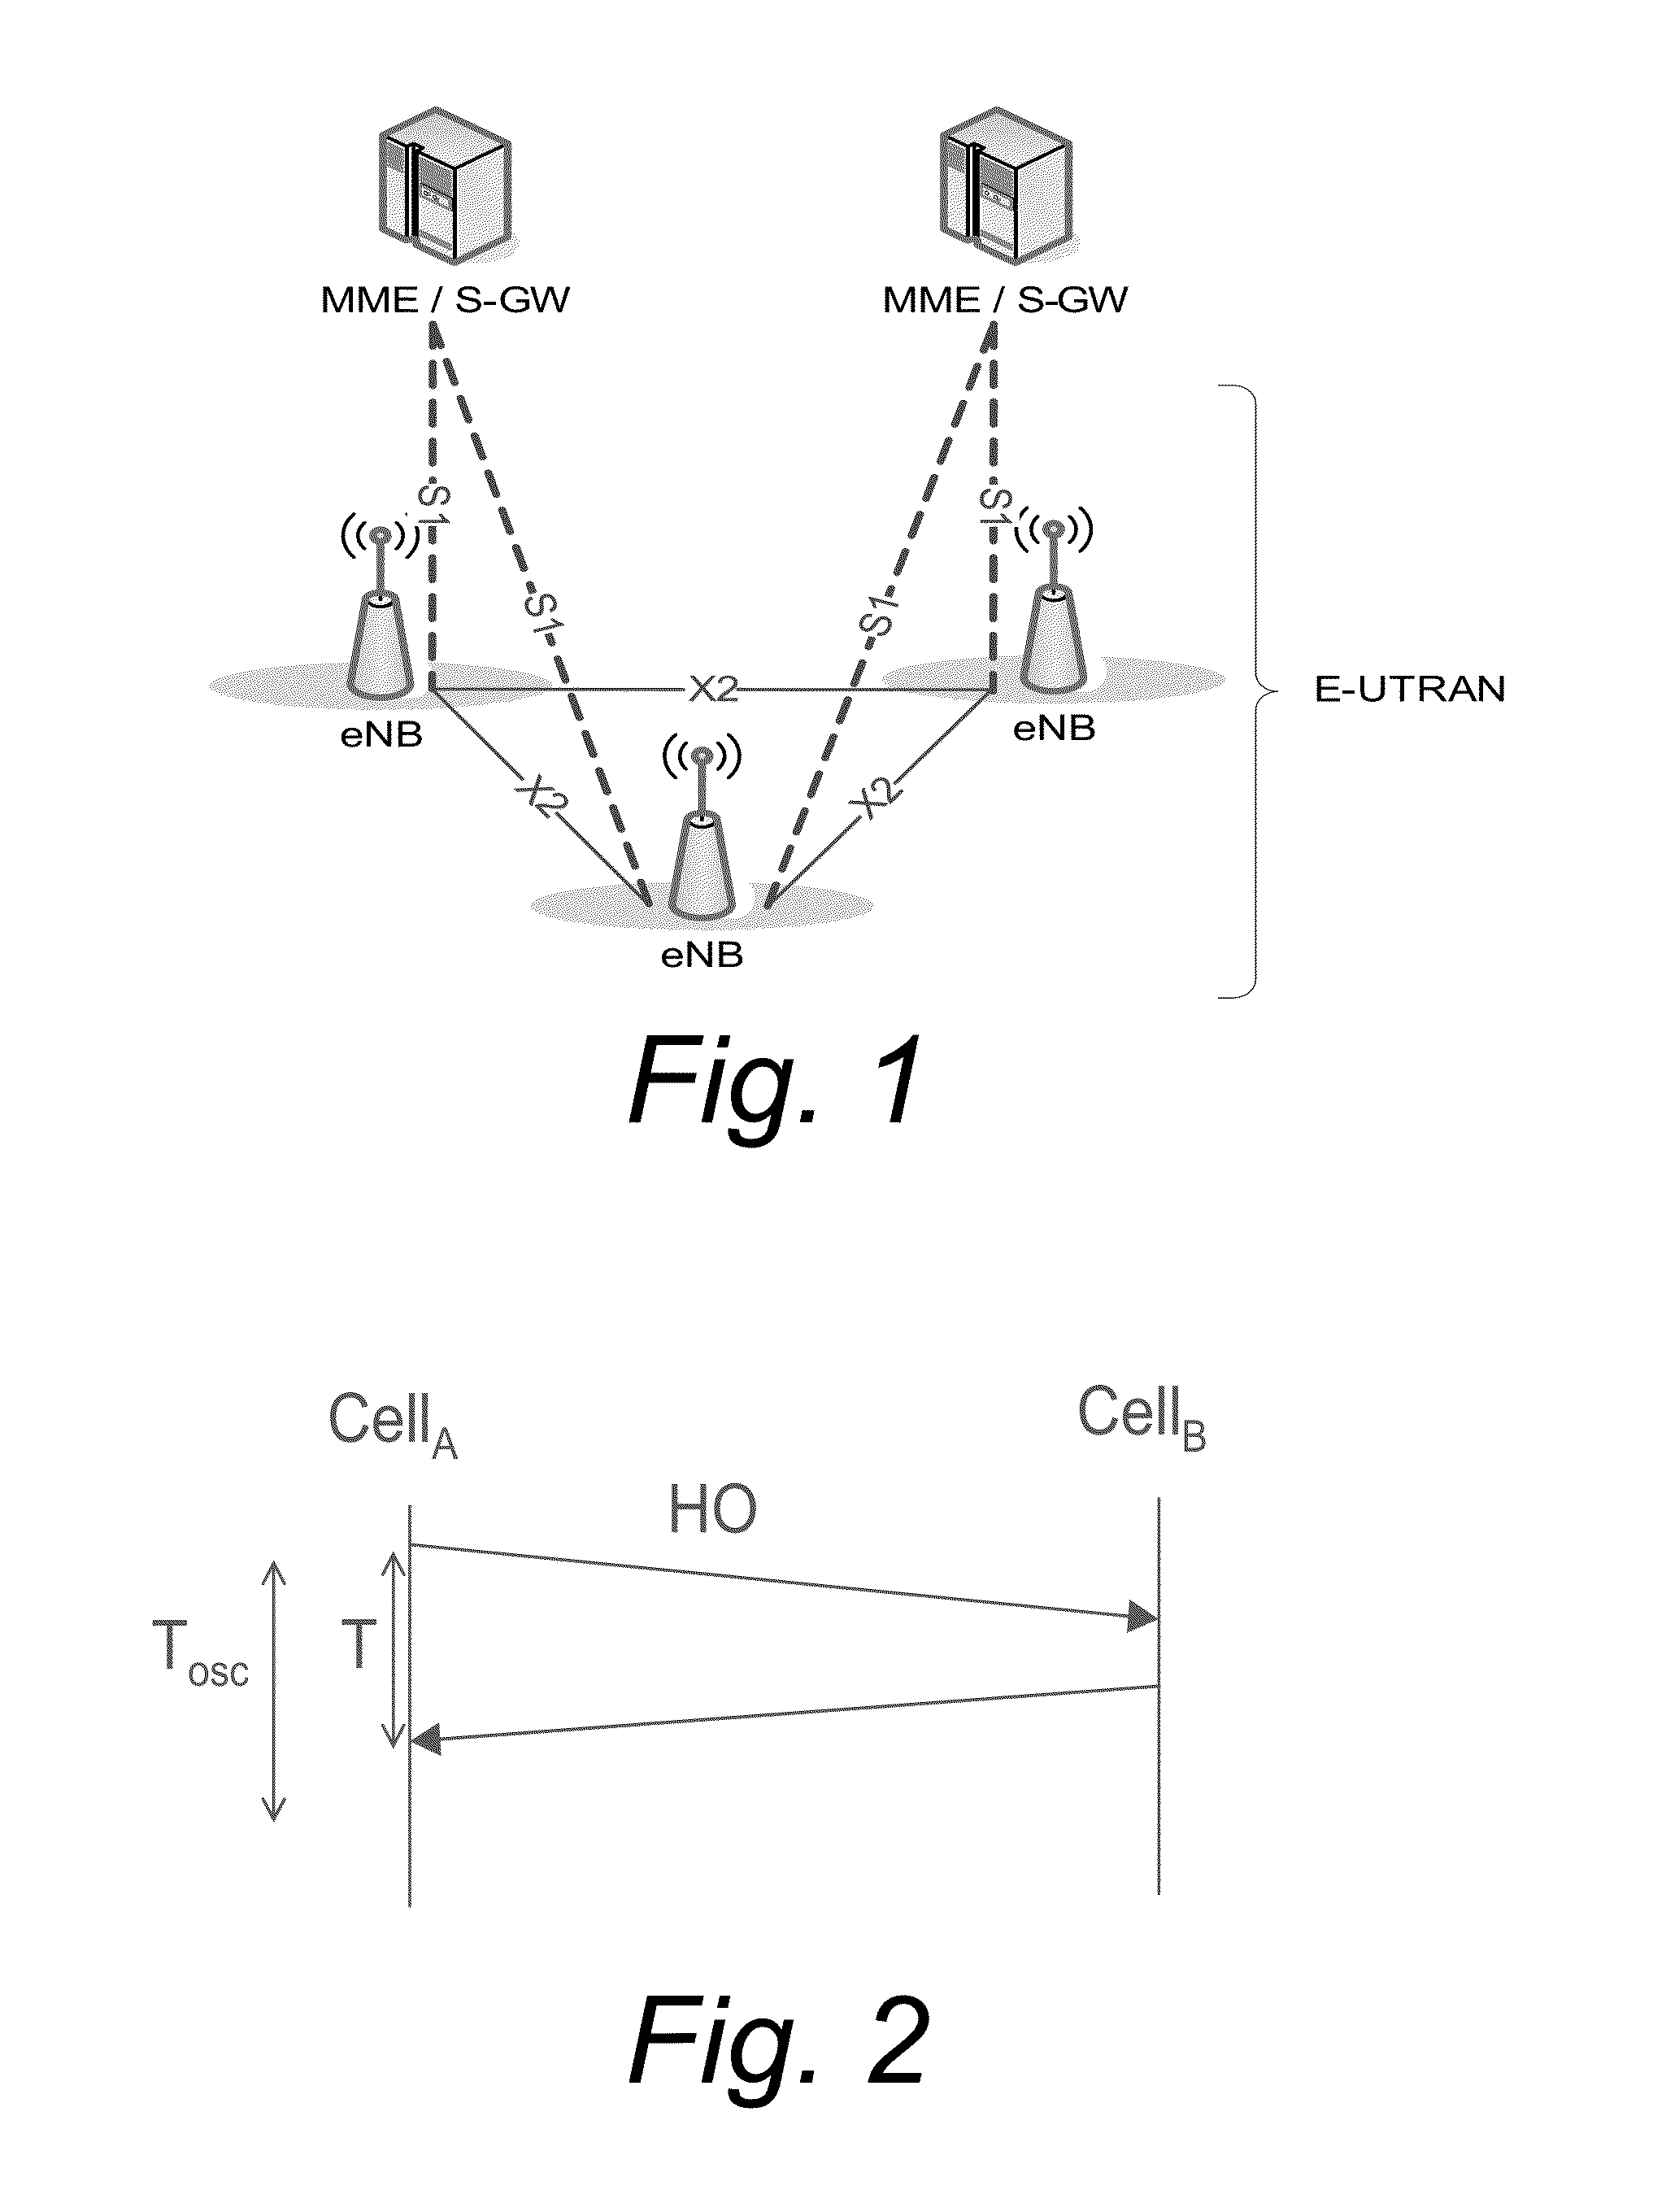 Method and apparatus for excluding non-mobility data from mobility key performance indicators